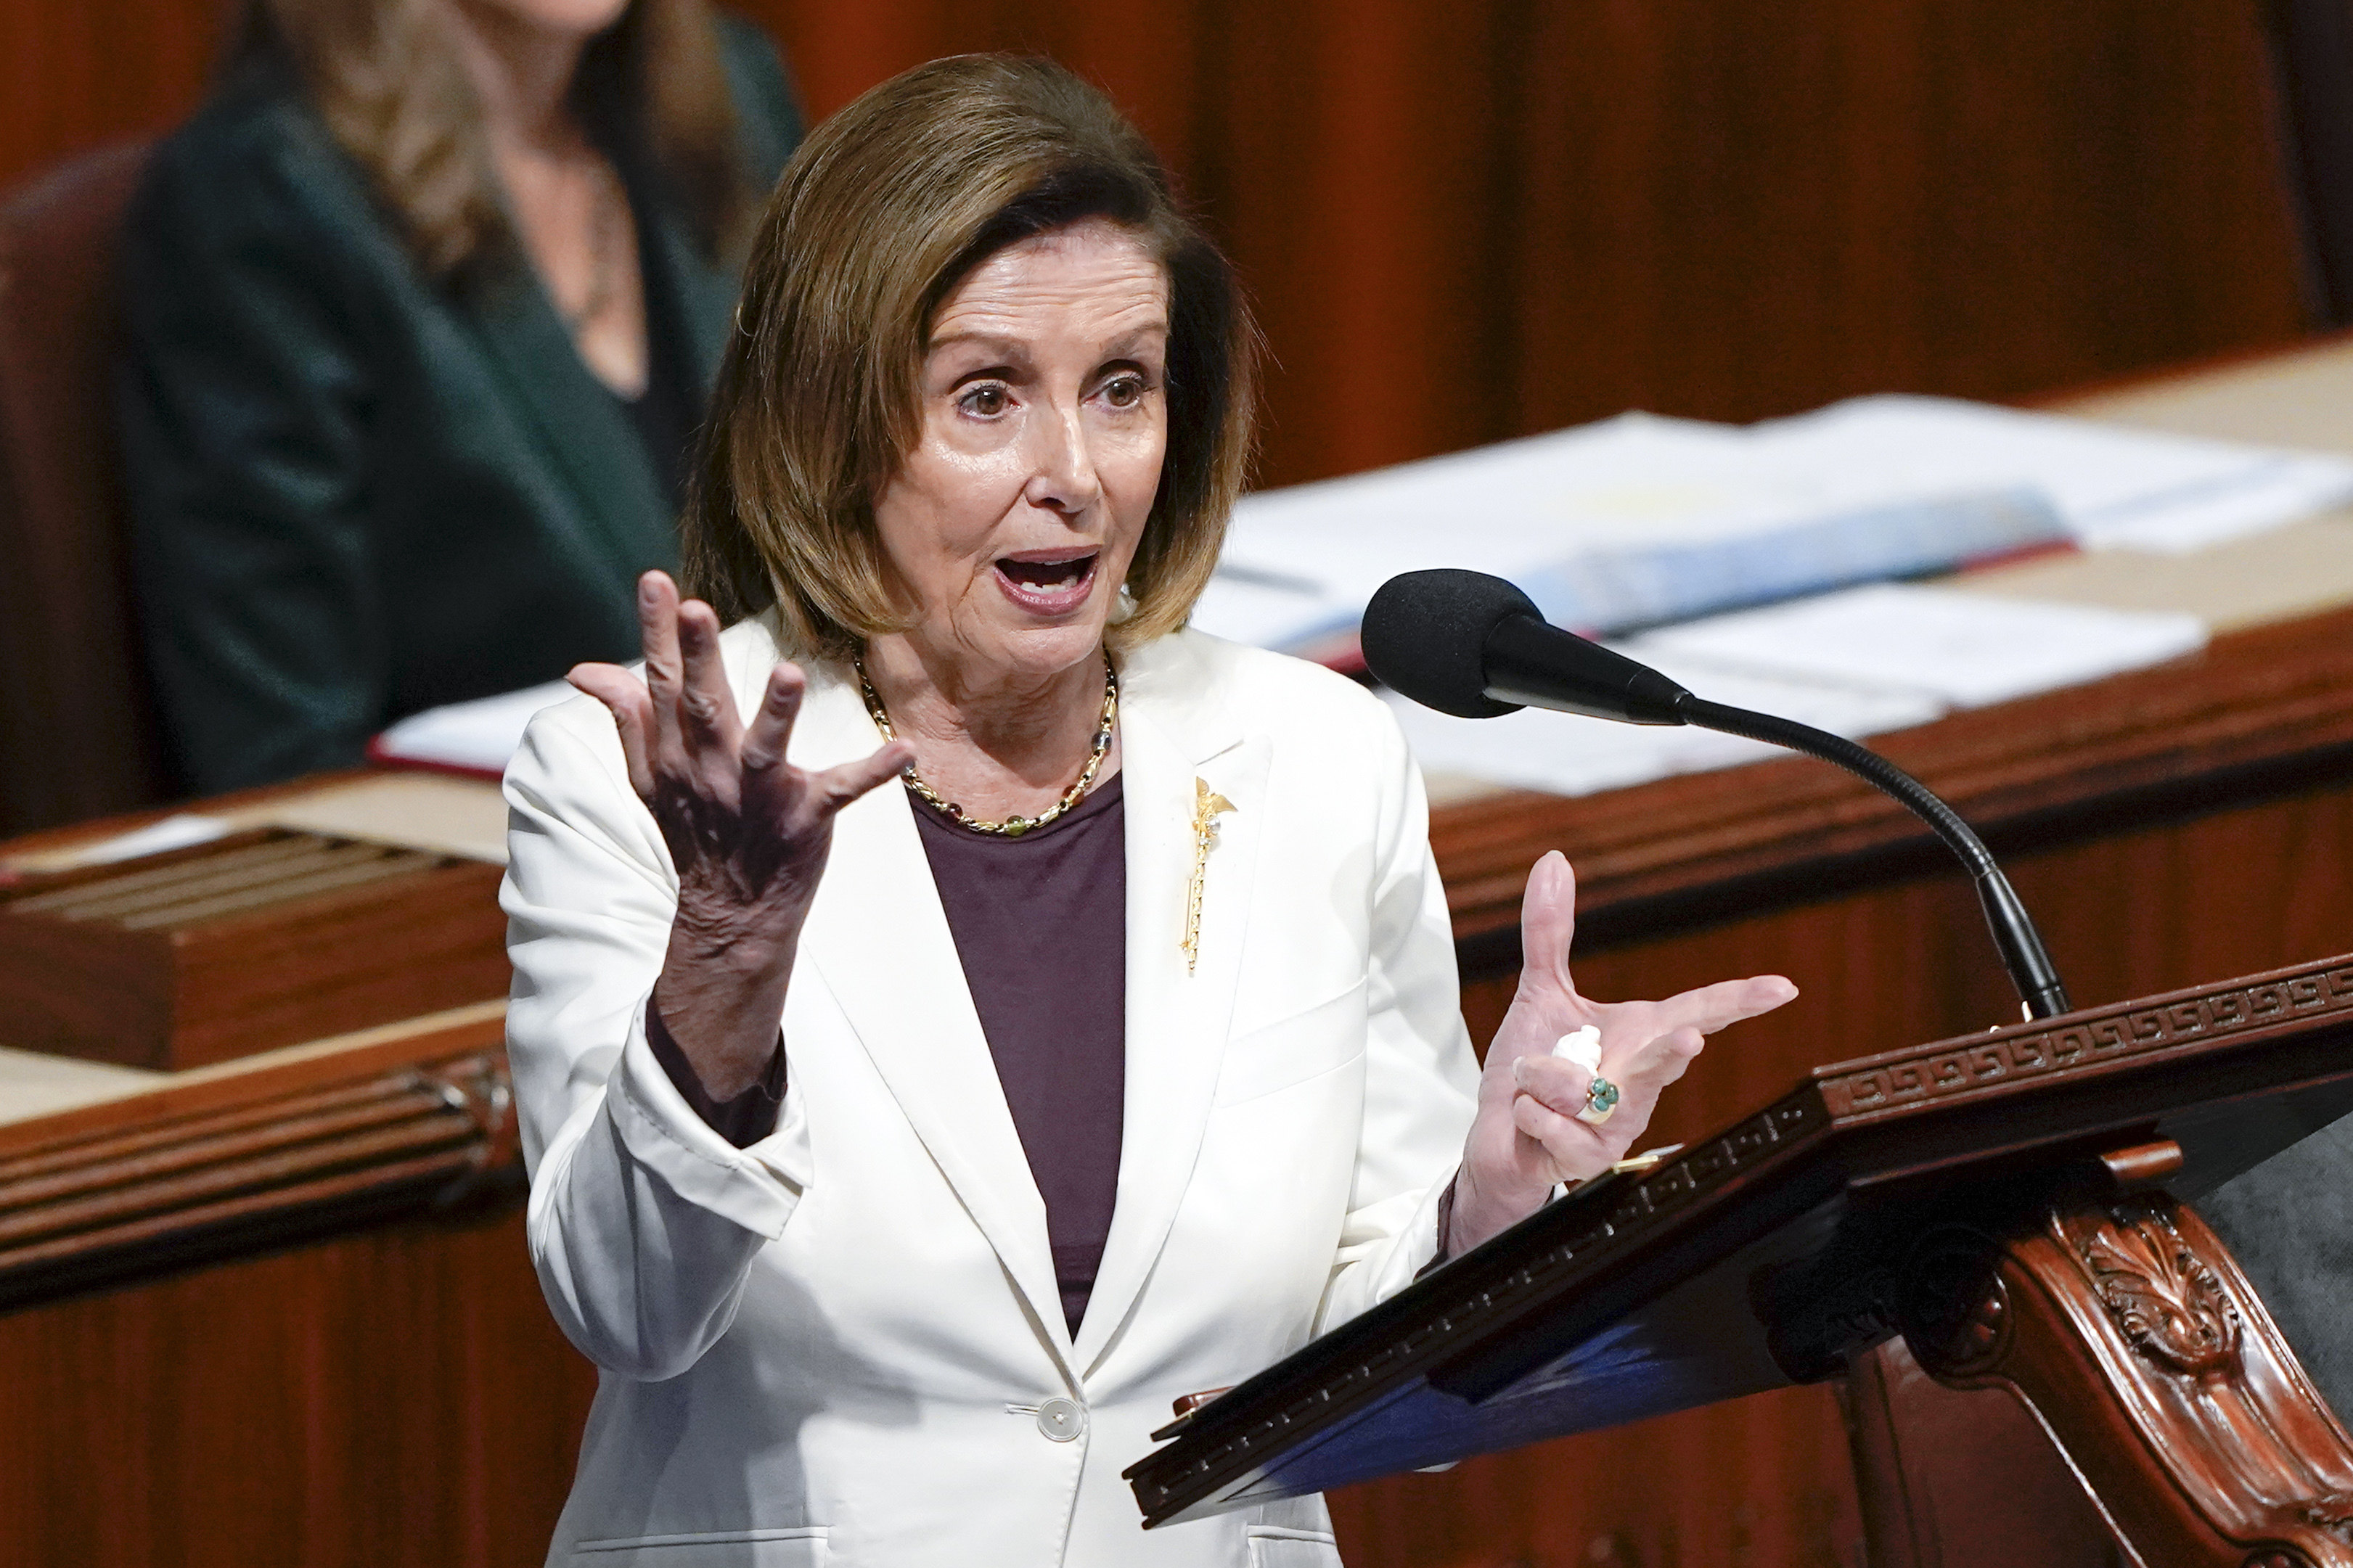 Nancy Pelosi has stepped down as speaks on the House floor at the Capitol in Washington Thursday, Nov. 17, 2022. (AP Photo/Carolyn Kaster)